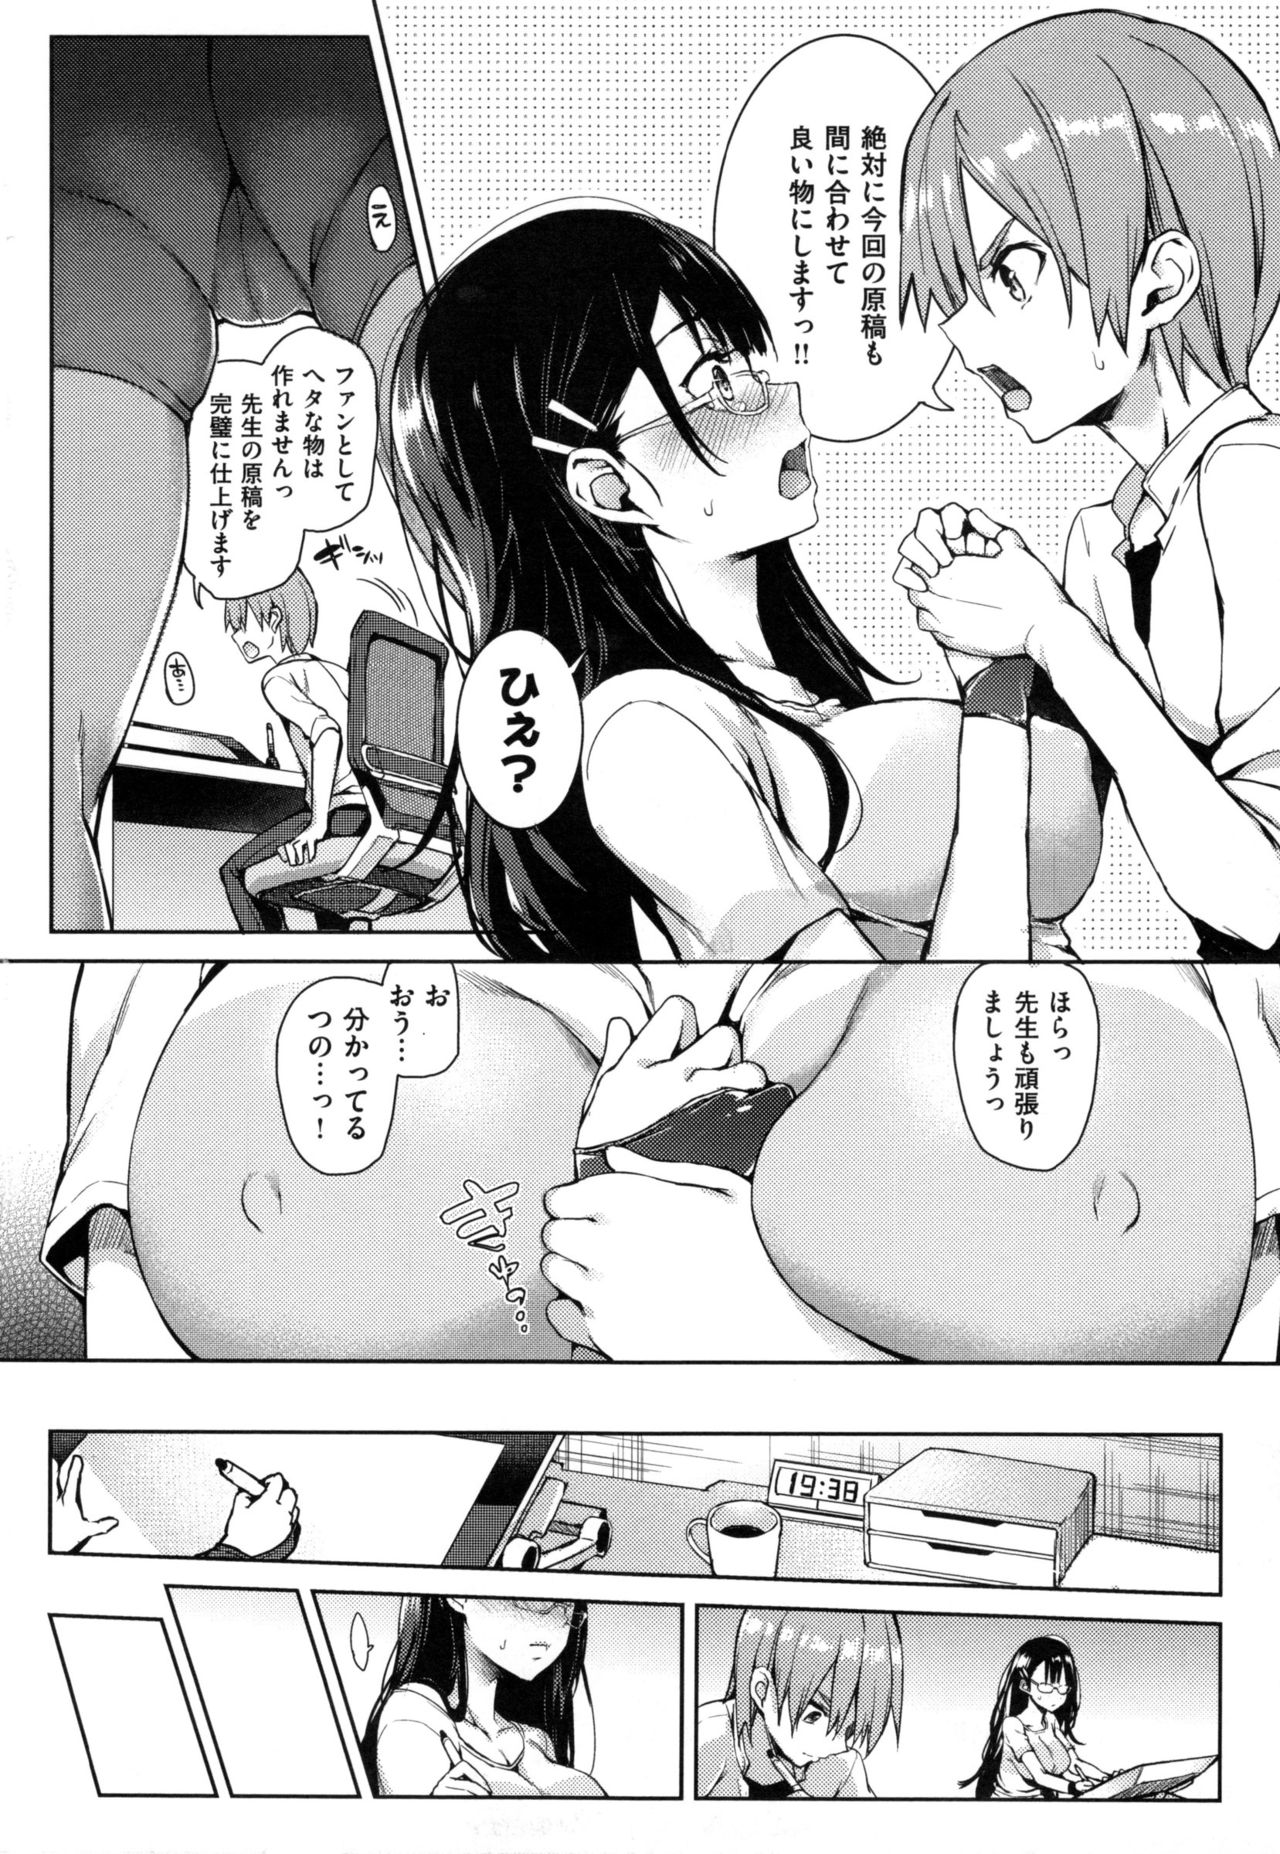 [Michiking] Shujuu Ecstasy - Sexual Relation of Master and Servant.  - page 21 full